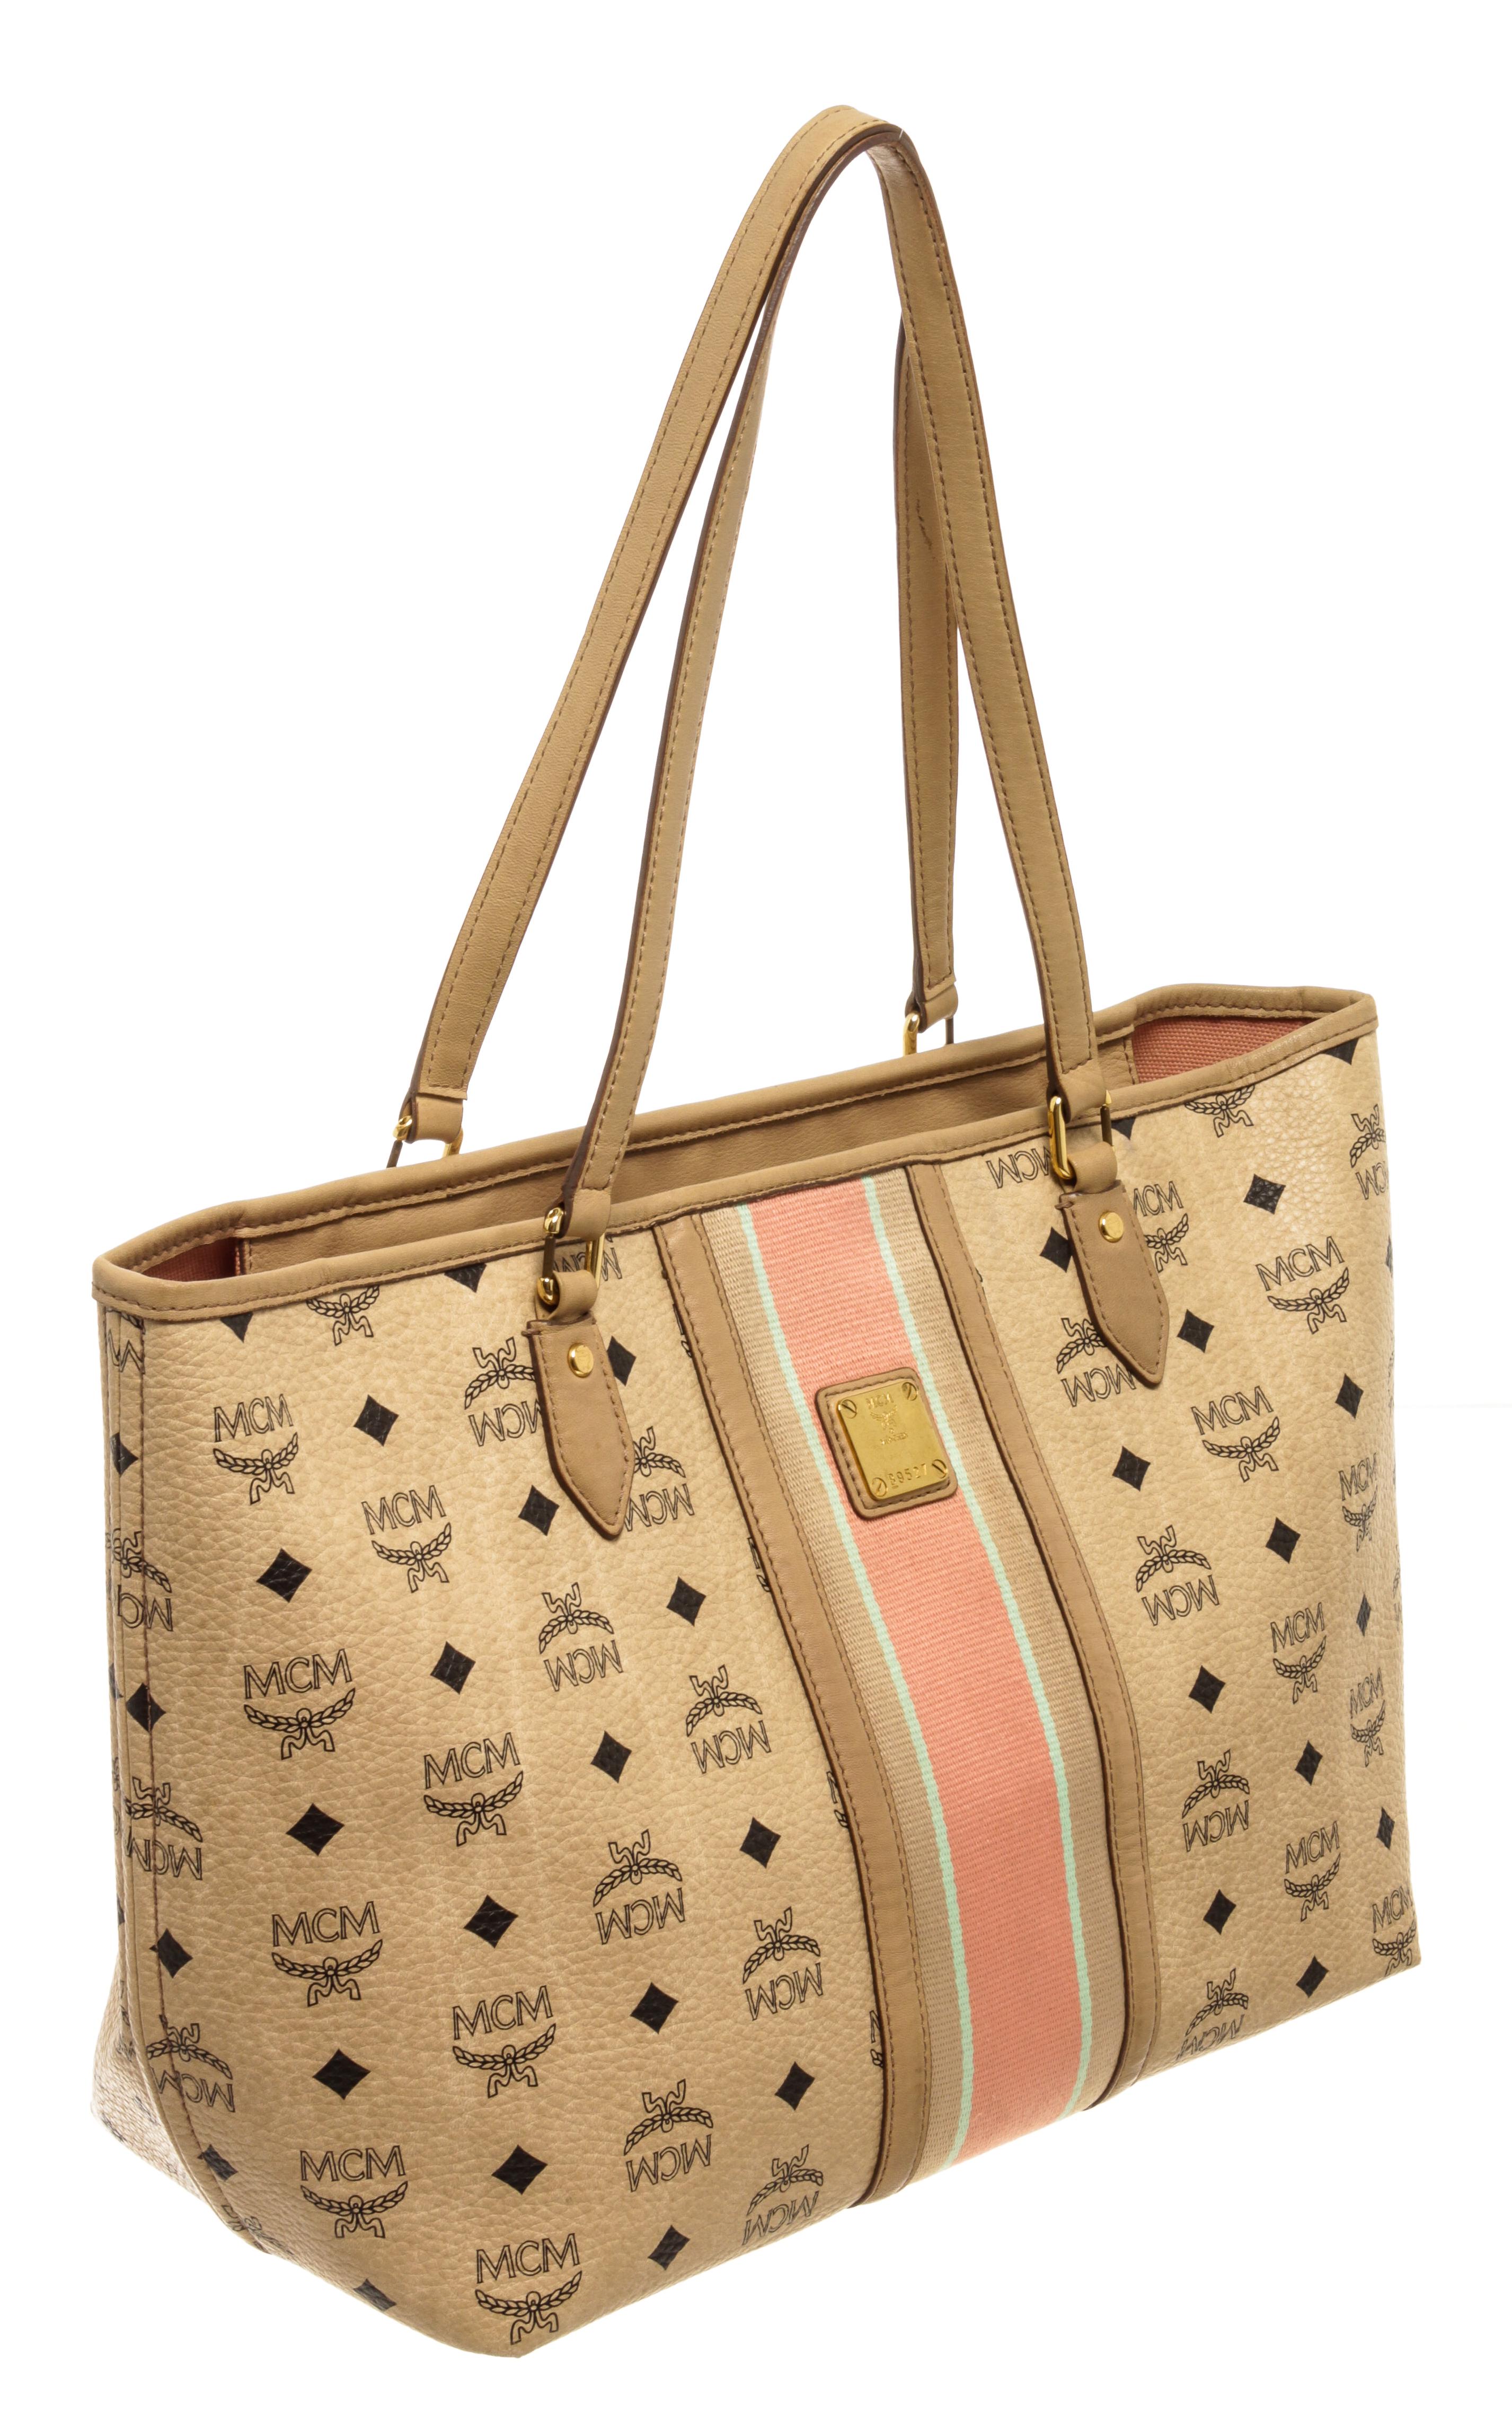 MCM Visetos Striped Tote Beige with this sophisticated tote is finely crafted of coated canvas in beige and with the classic black mcm monogram print, matching beige leather top handles with gold hardware, and a pink and mint green stripe down the